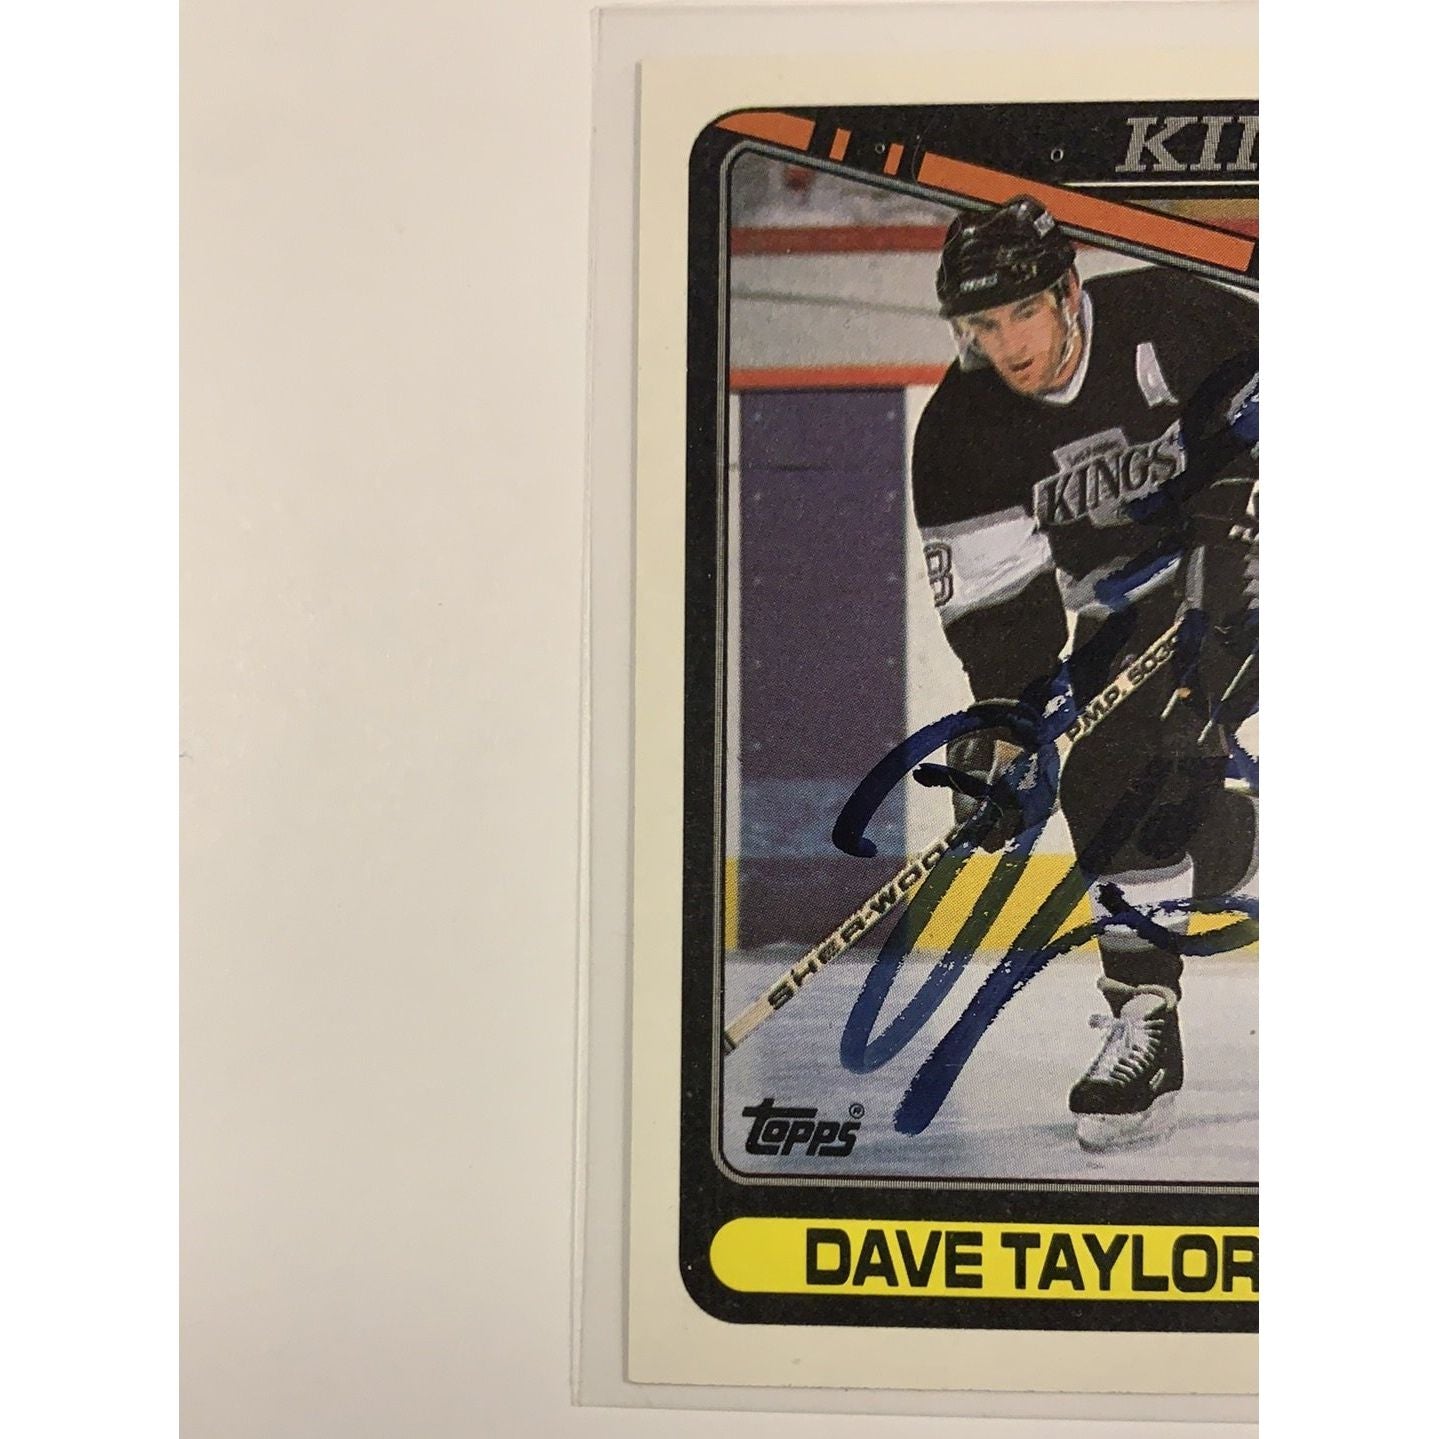  1990 Topps Dave Taylor In Person Auto  Local Legends Cards & Collectibles